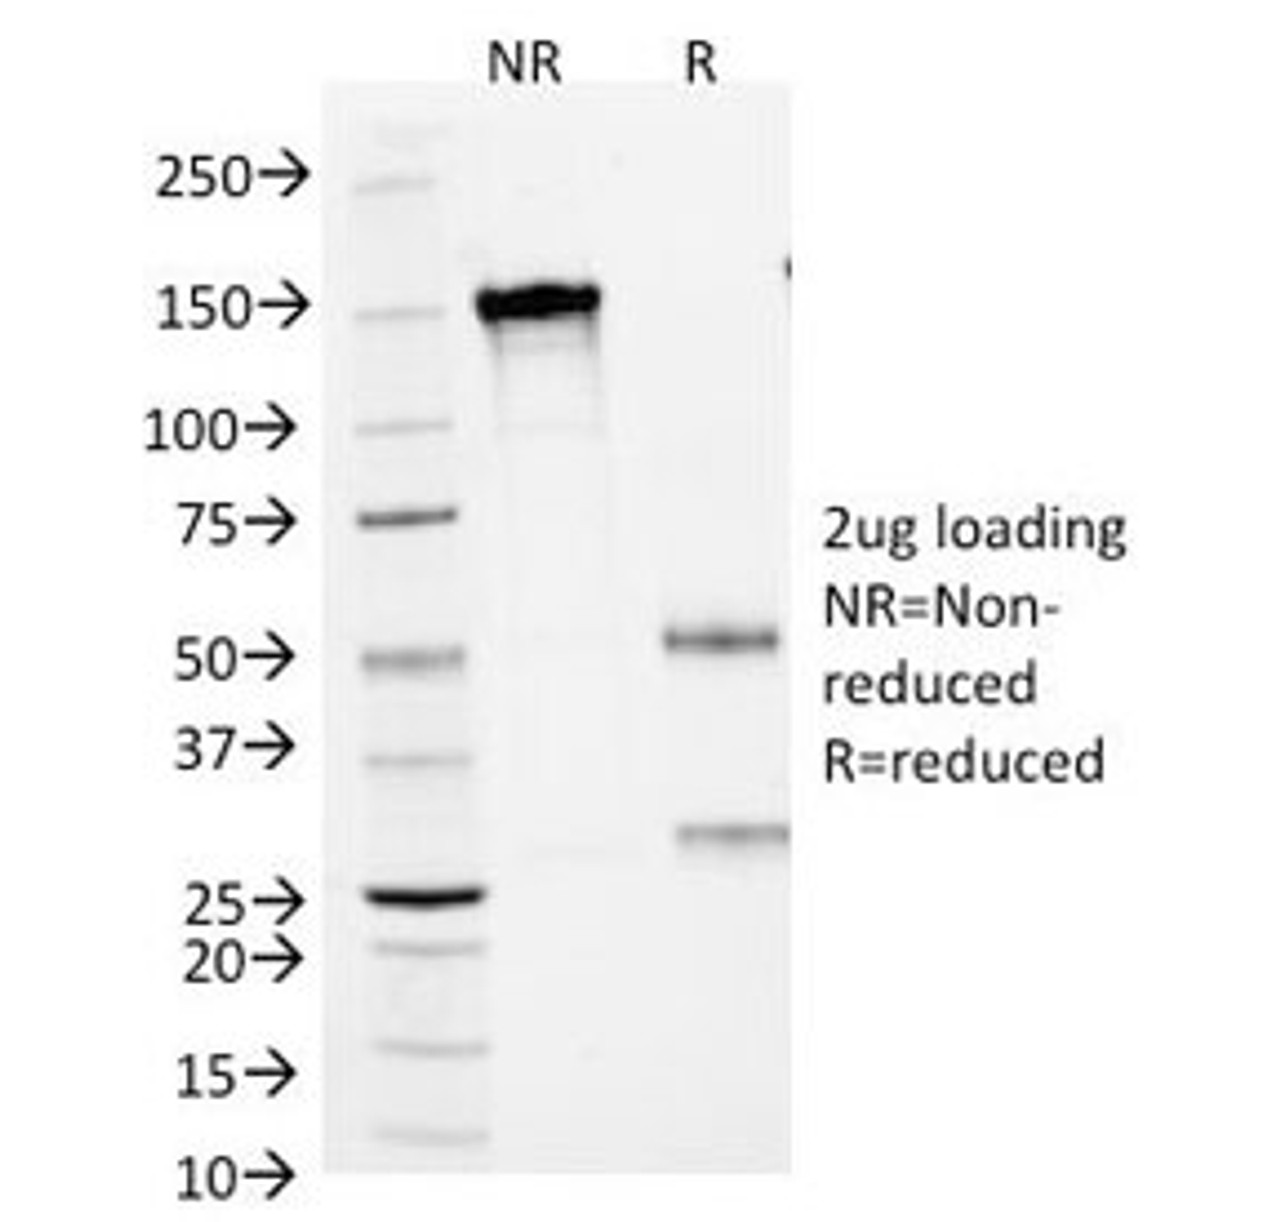 SDS-PAGE Analysis of Purified, BSA-Free SCLC Marker Antibody (clone MOC-52) . Confirmation of Integrity and Purity of the Antibody.